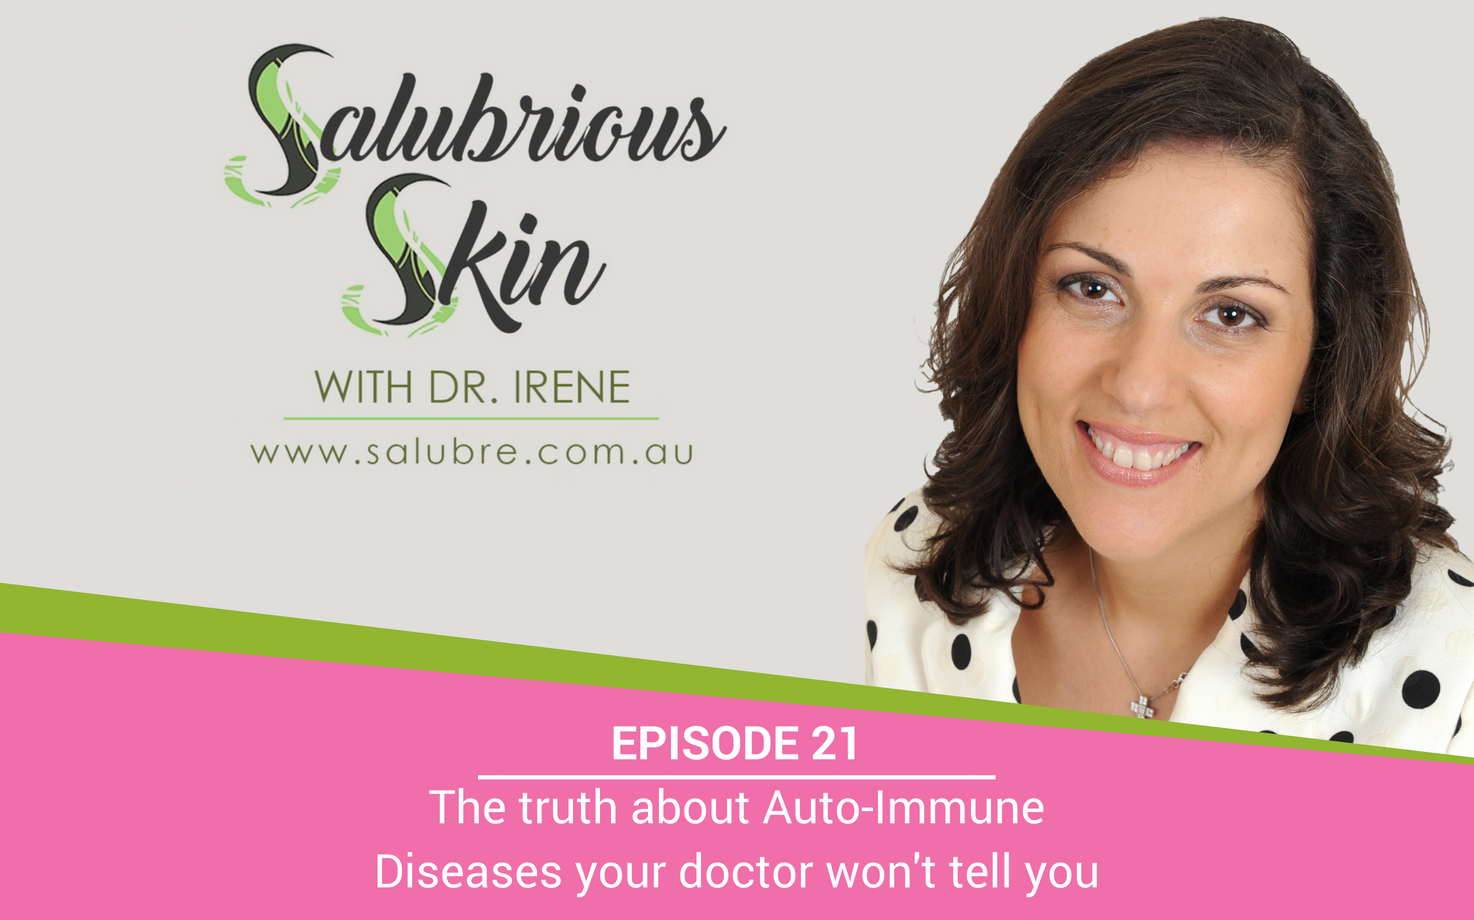 Episode 21: The Truth About Auto-Immune Diseases No Doctor Will Tell You